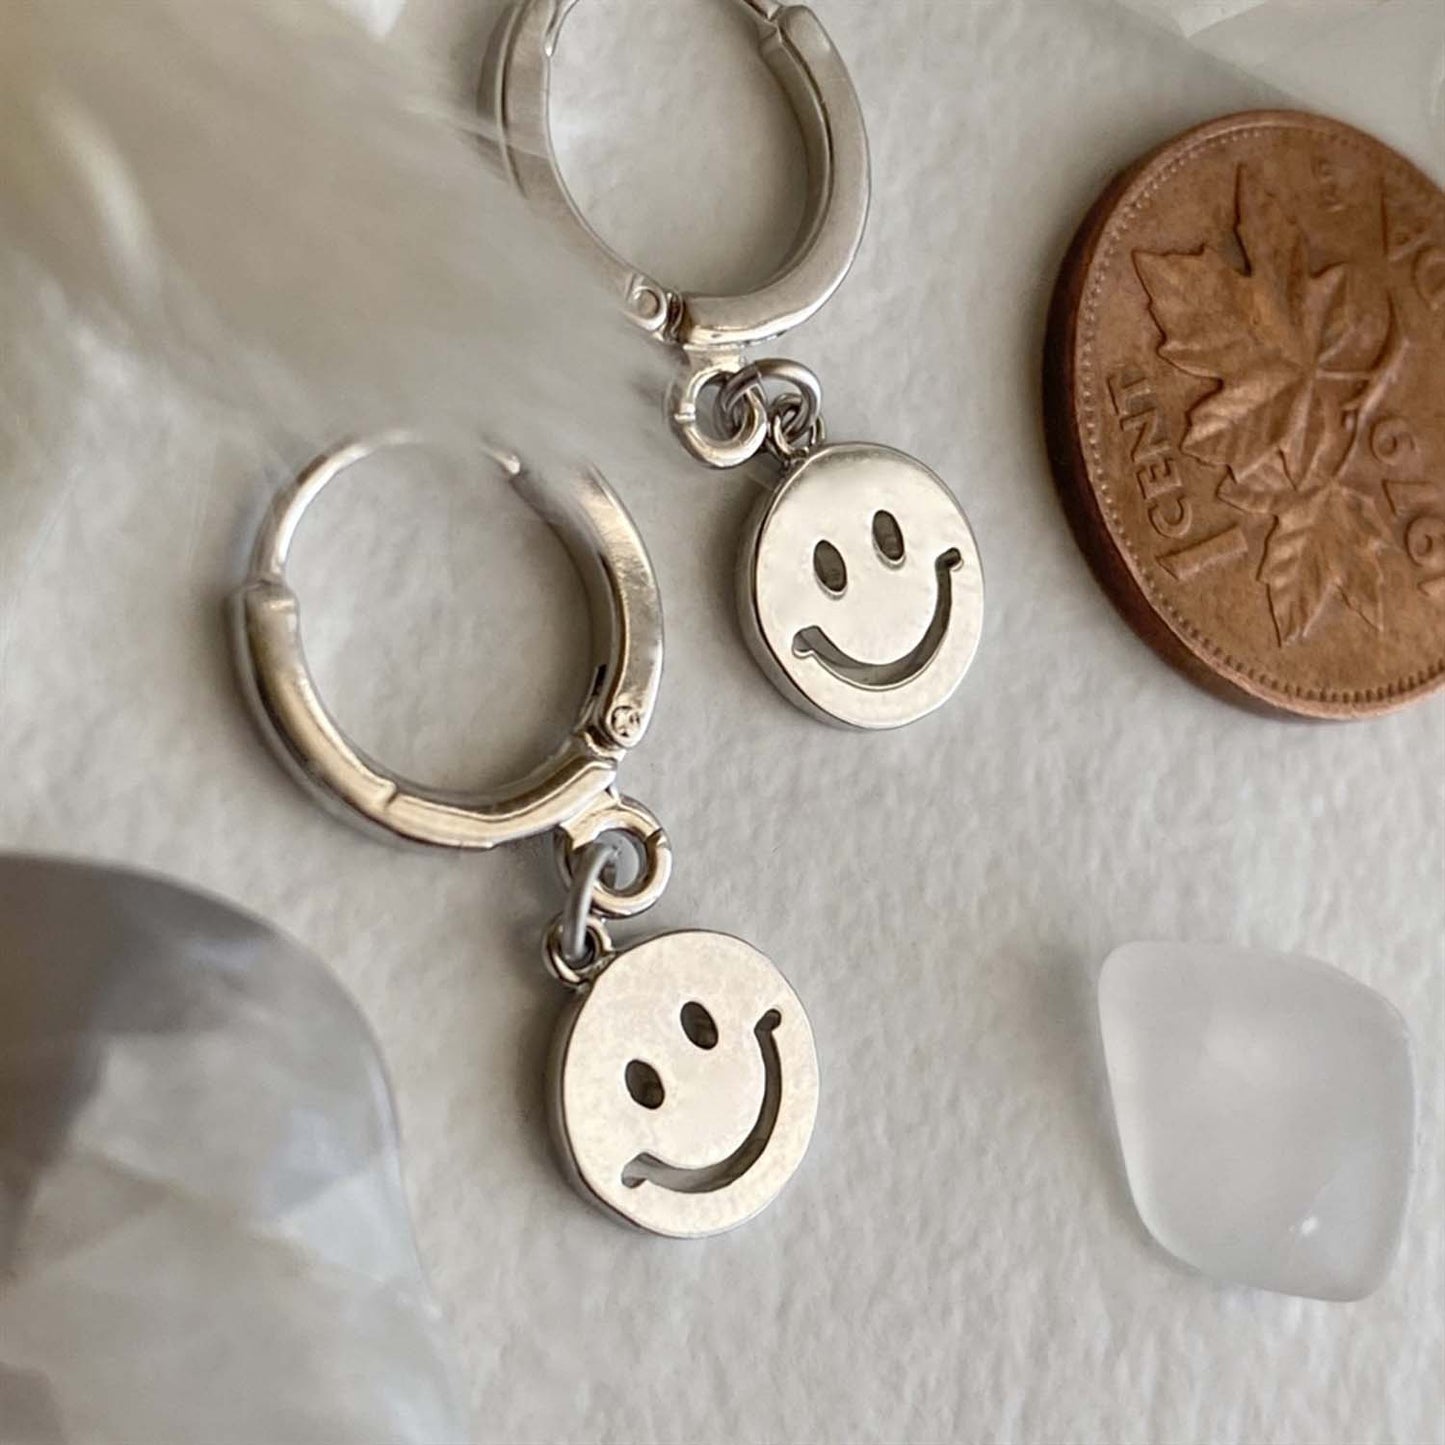 Have A Nice Day Smiley Face Hugger Hoop Earrings in Silver